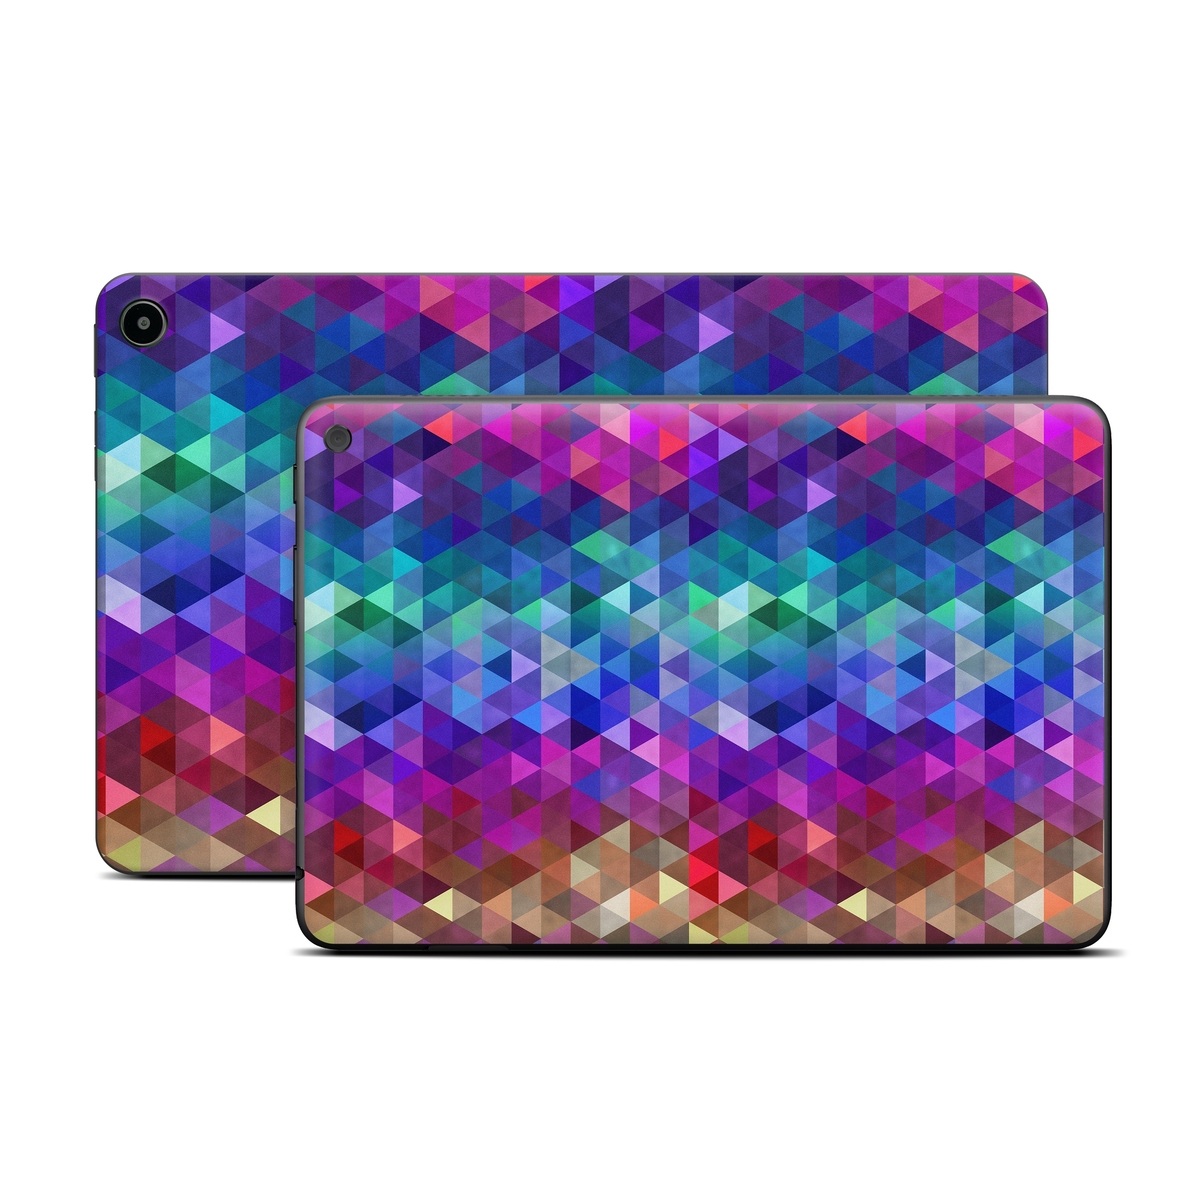 Amazon Fire Tablet Series Skin Skin design of Purple, Violet, Pattern, Blue, Magenta, Triangle, Line, Design, Graphic design, Symmetry, with blue, purple, green, red, pink colors